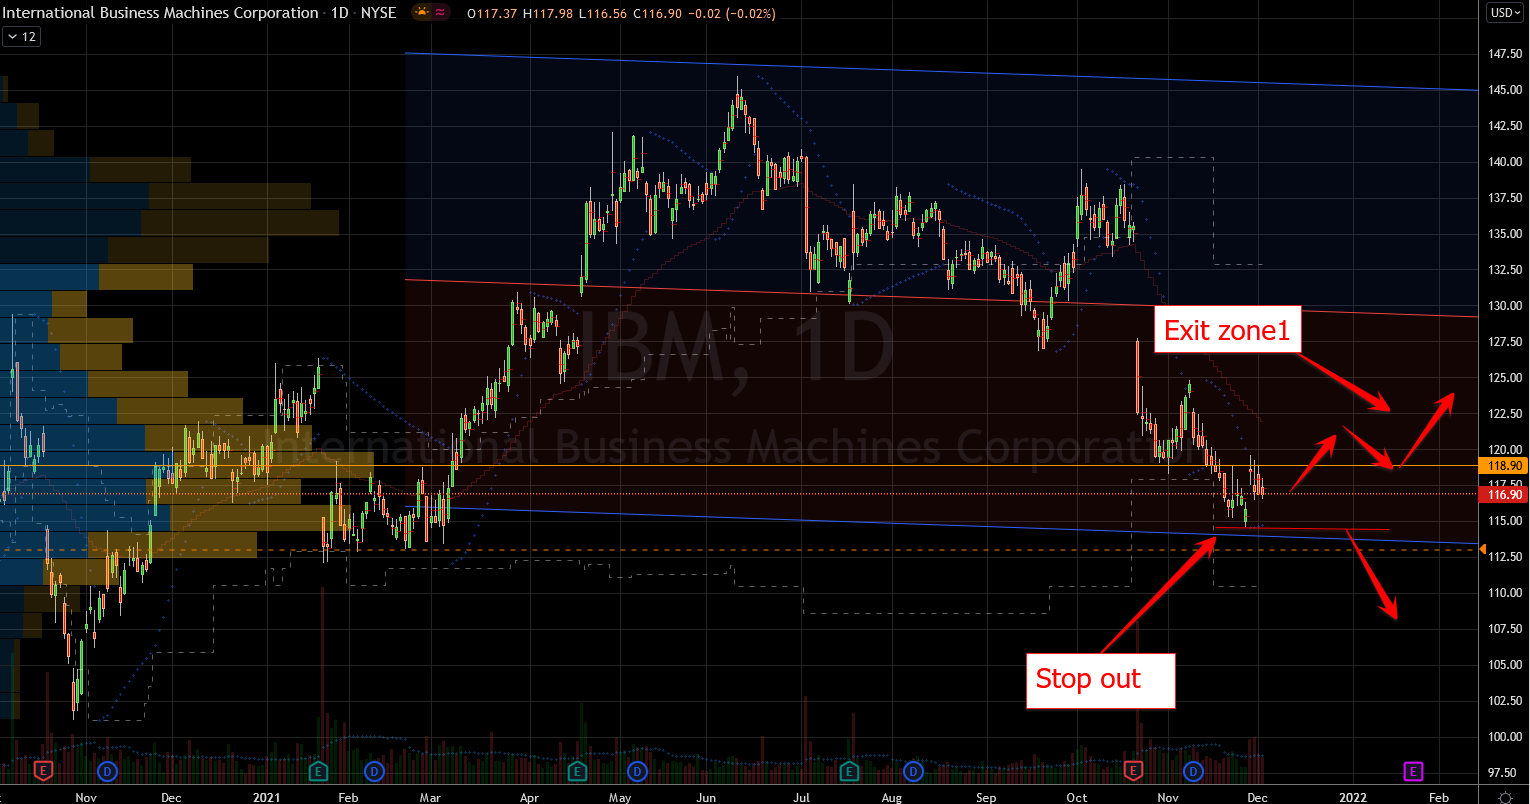 IBM Stock Chart Showing Potential Upswing